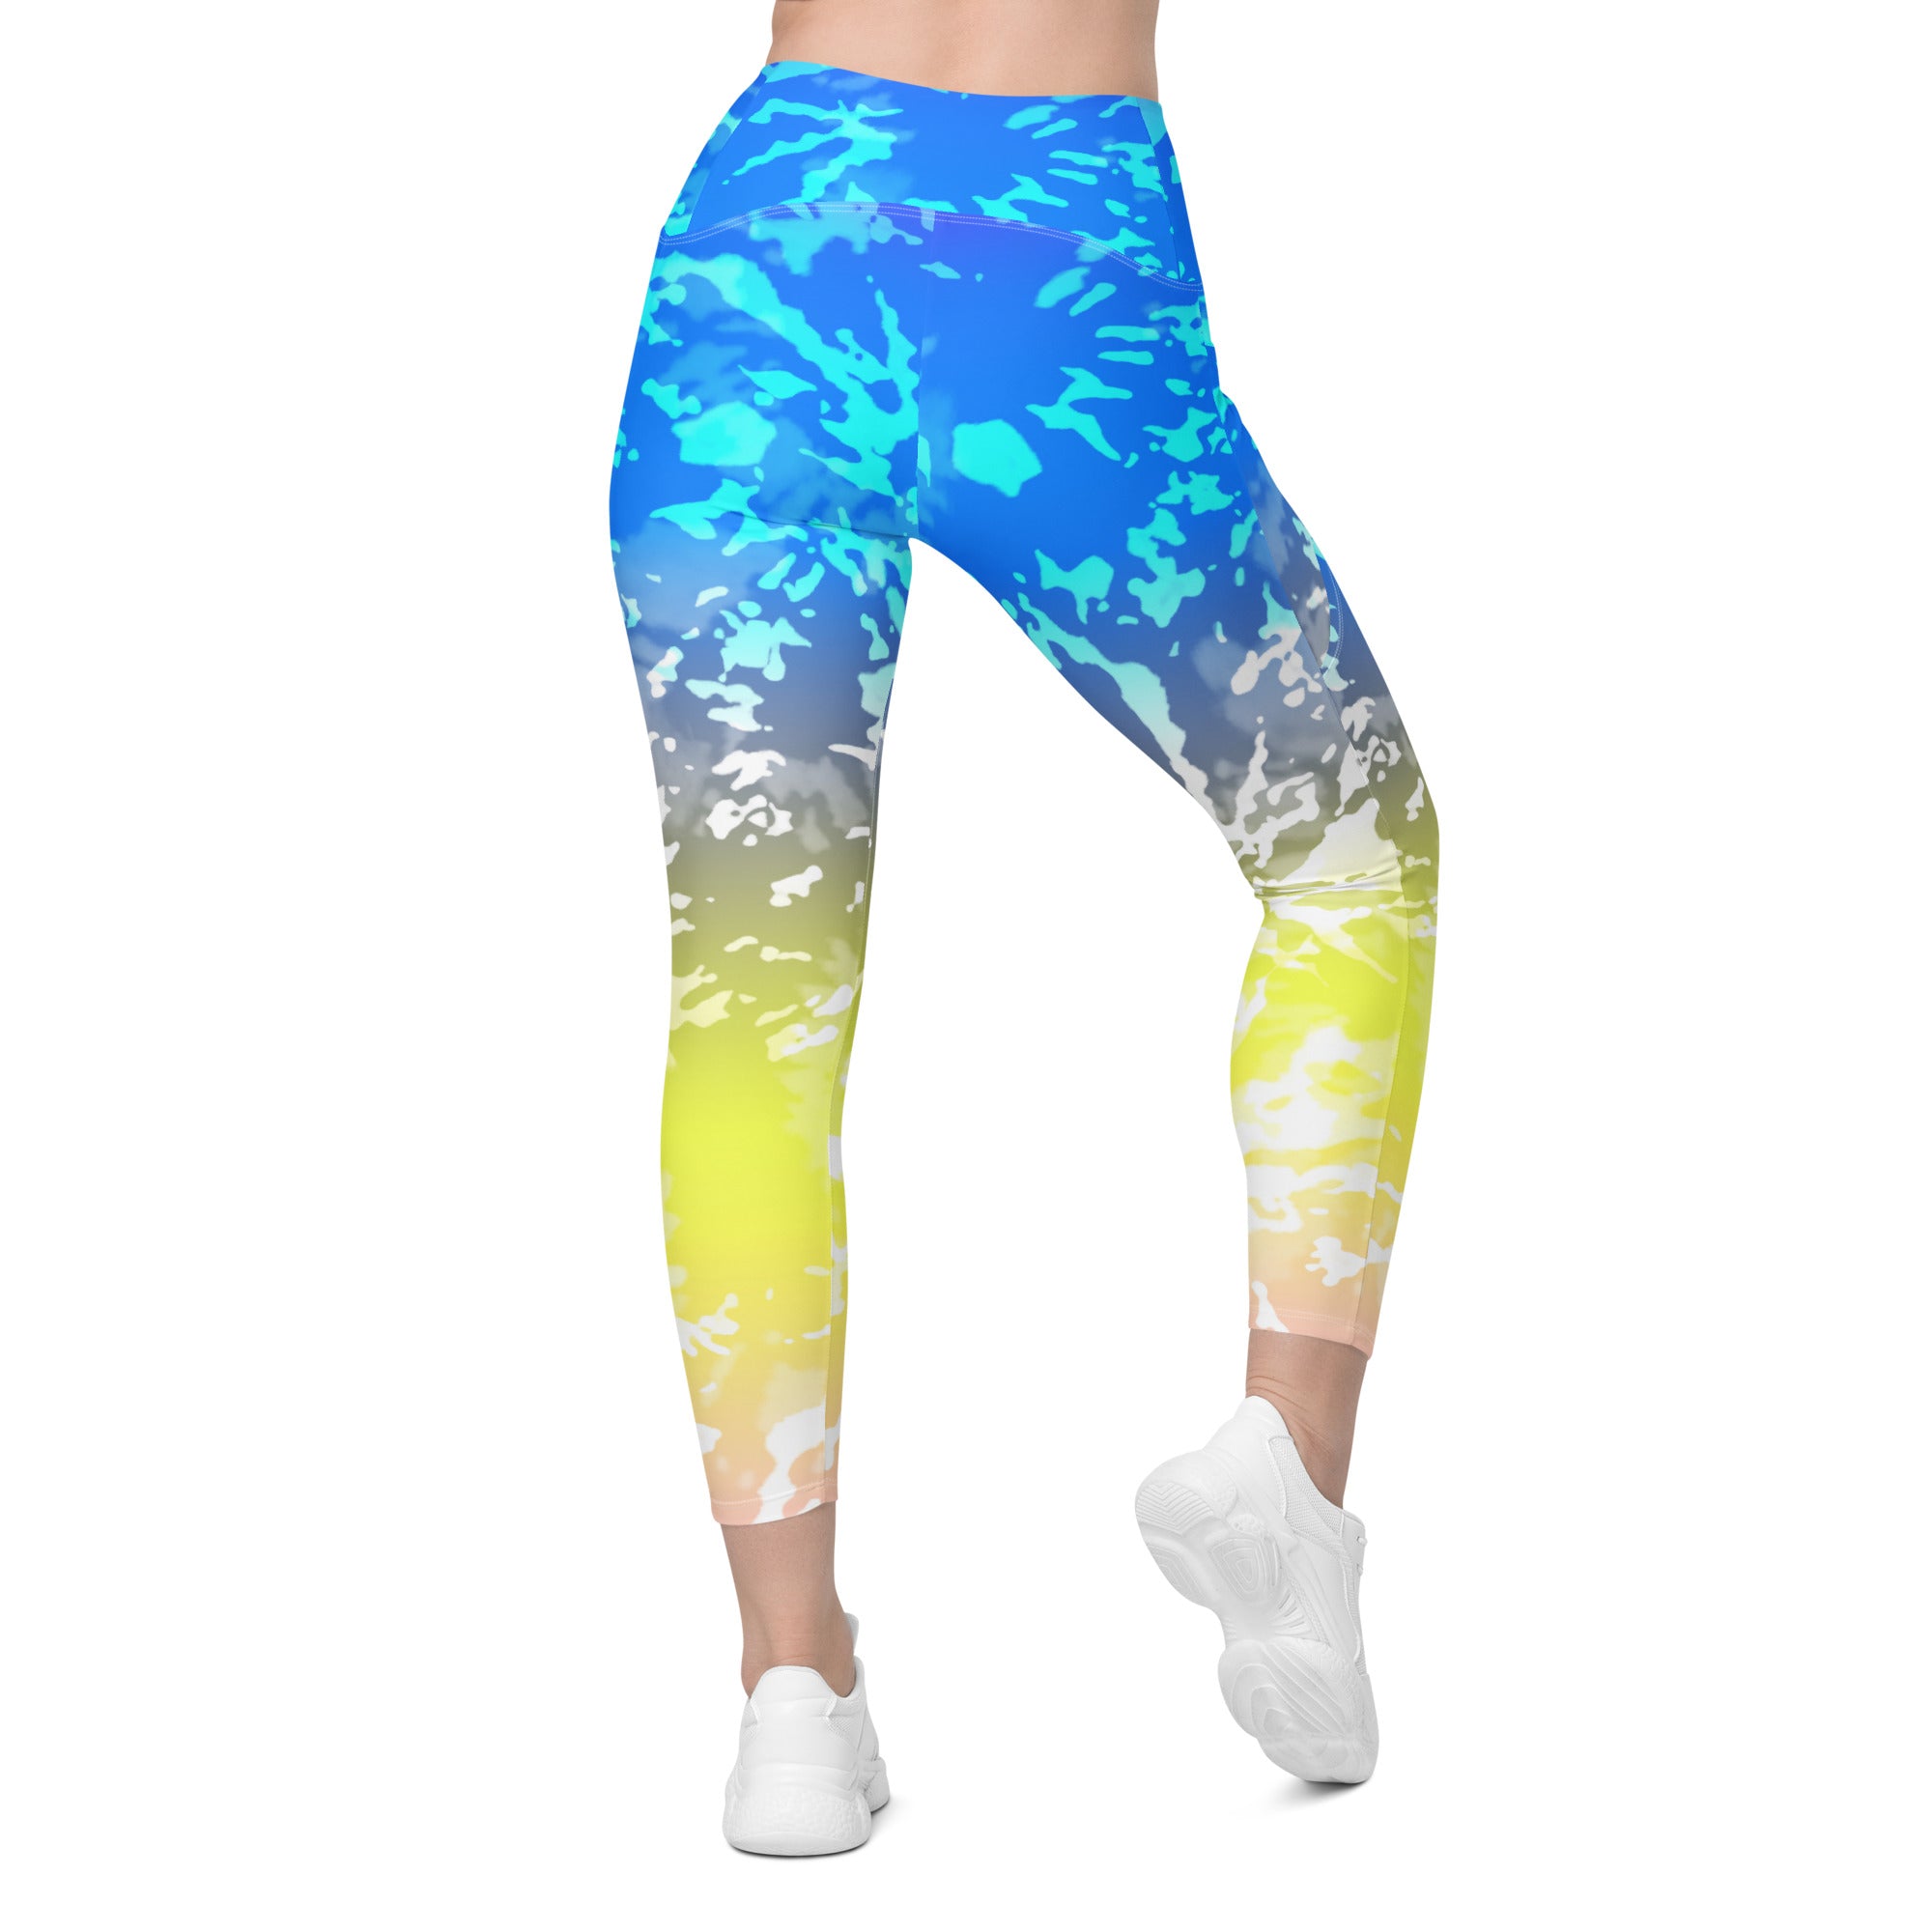 Crossover leggings with pockets- TIE DYE MULTICOLOUR SPLASHES